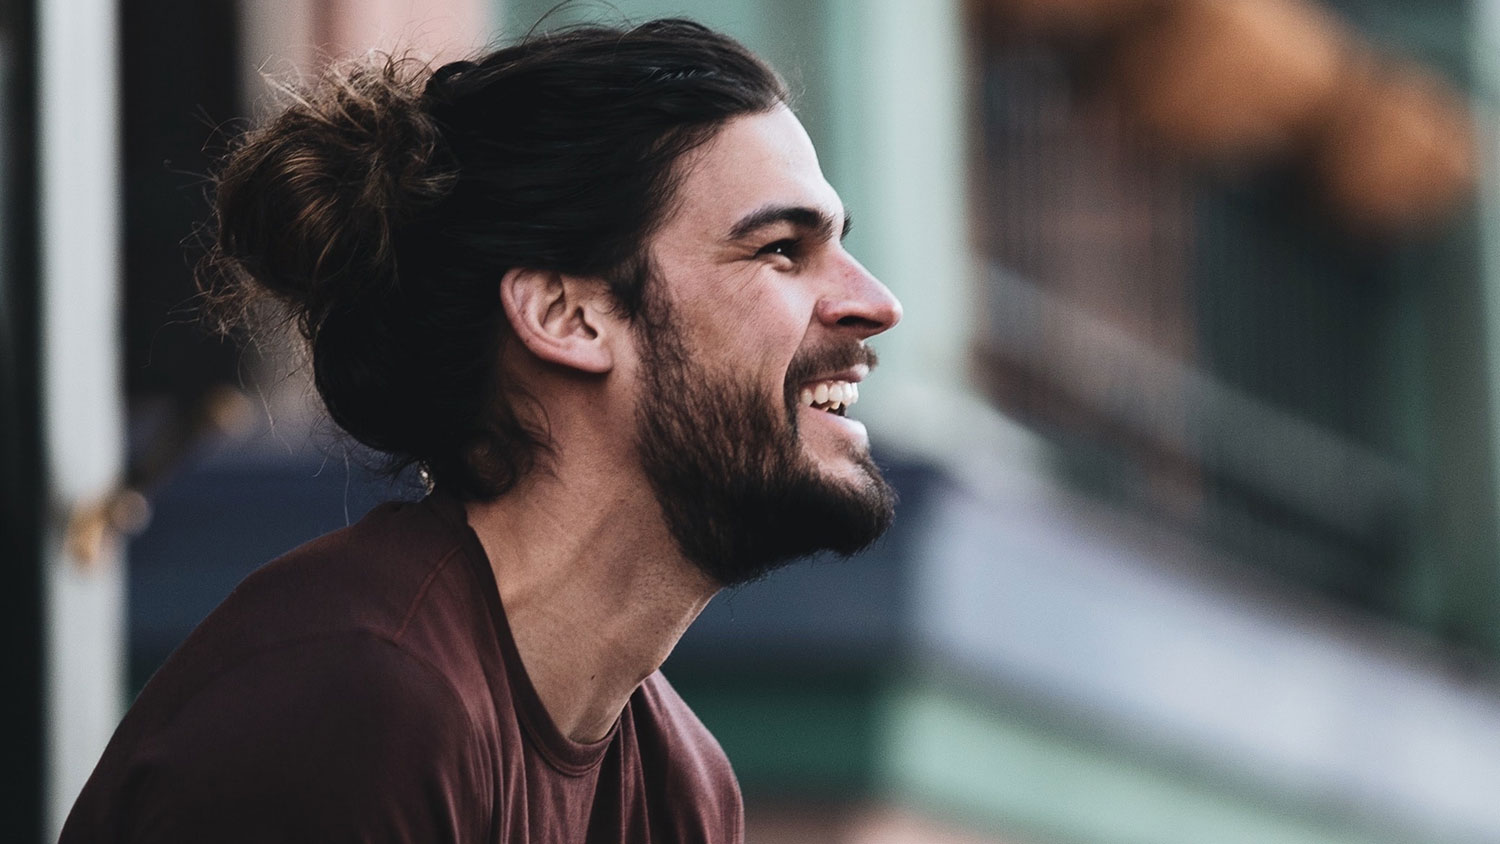 Profile of smiling Male with man-bun